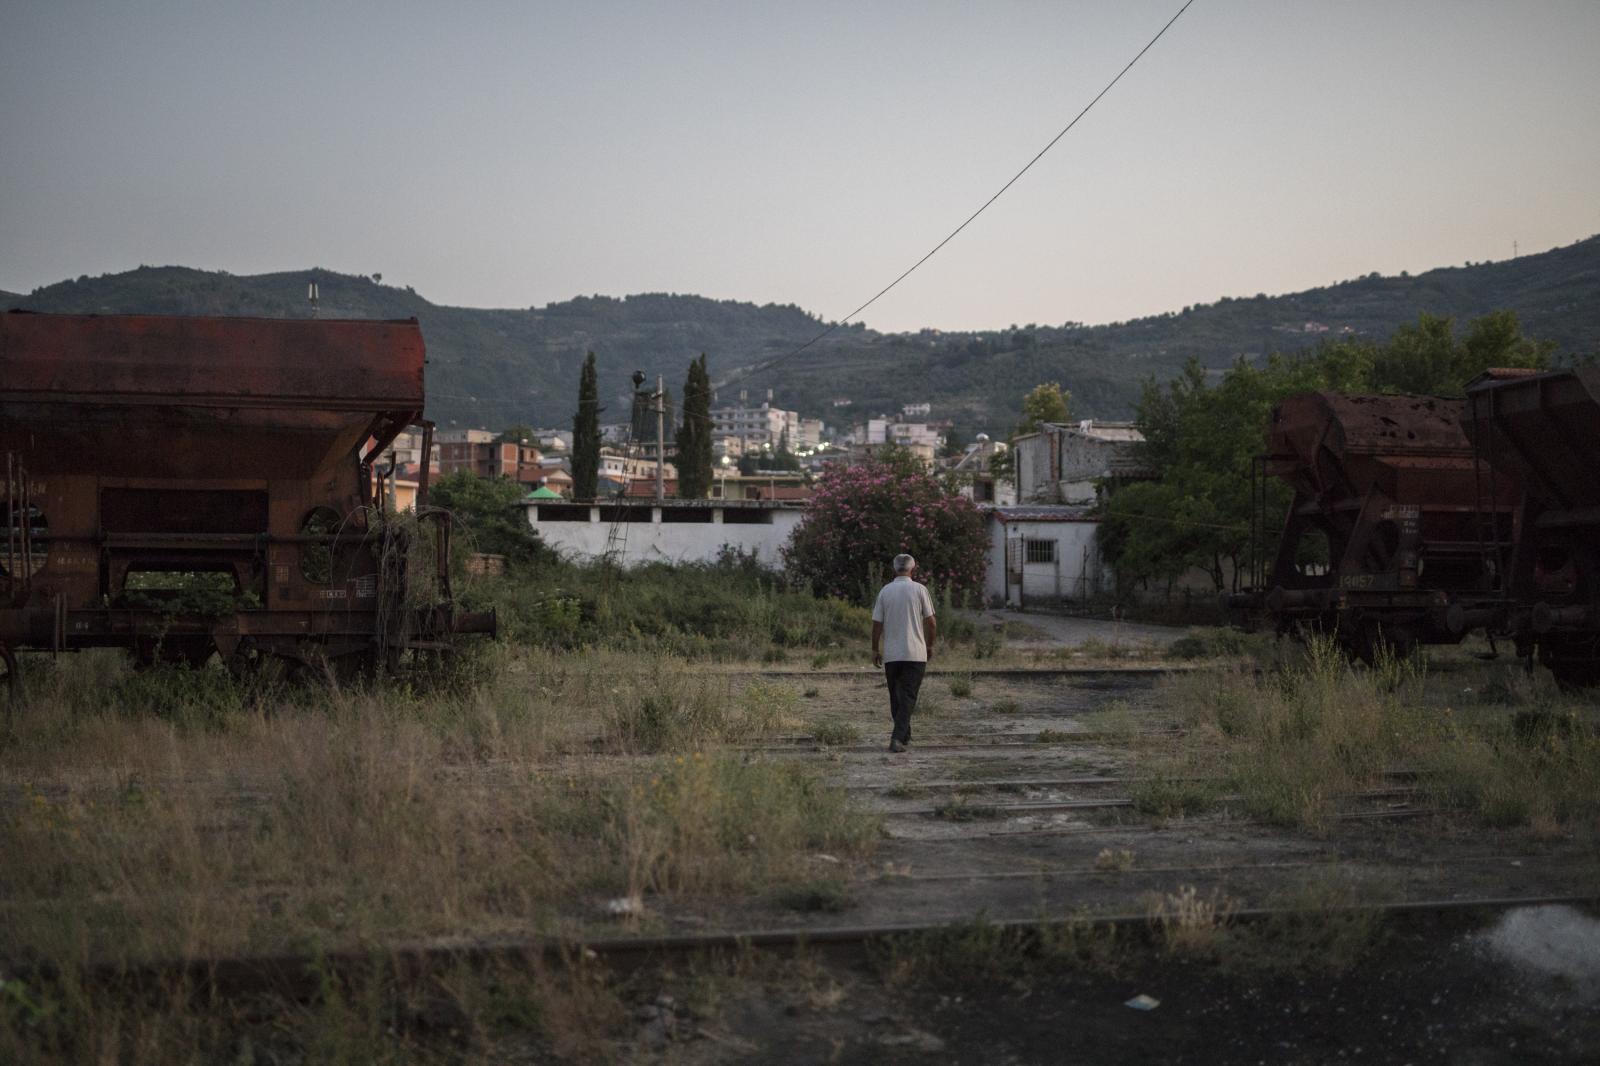 Albania Unemployment - A man takes an evening stroll through an abandoned...